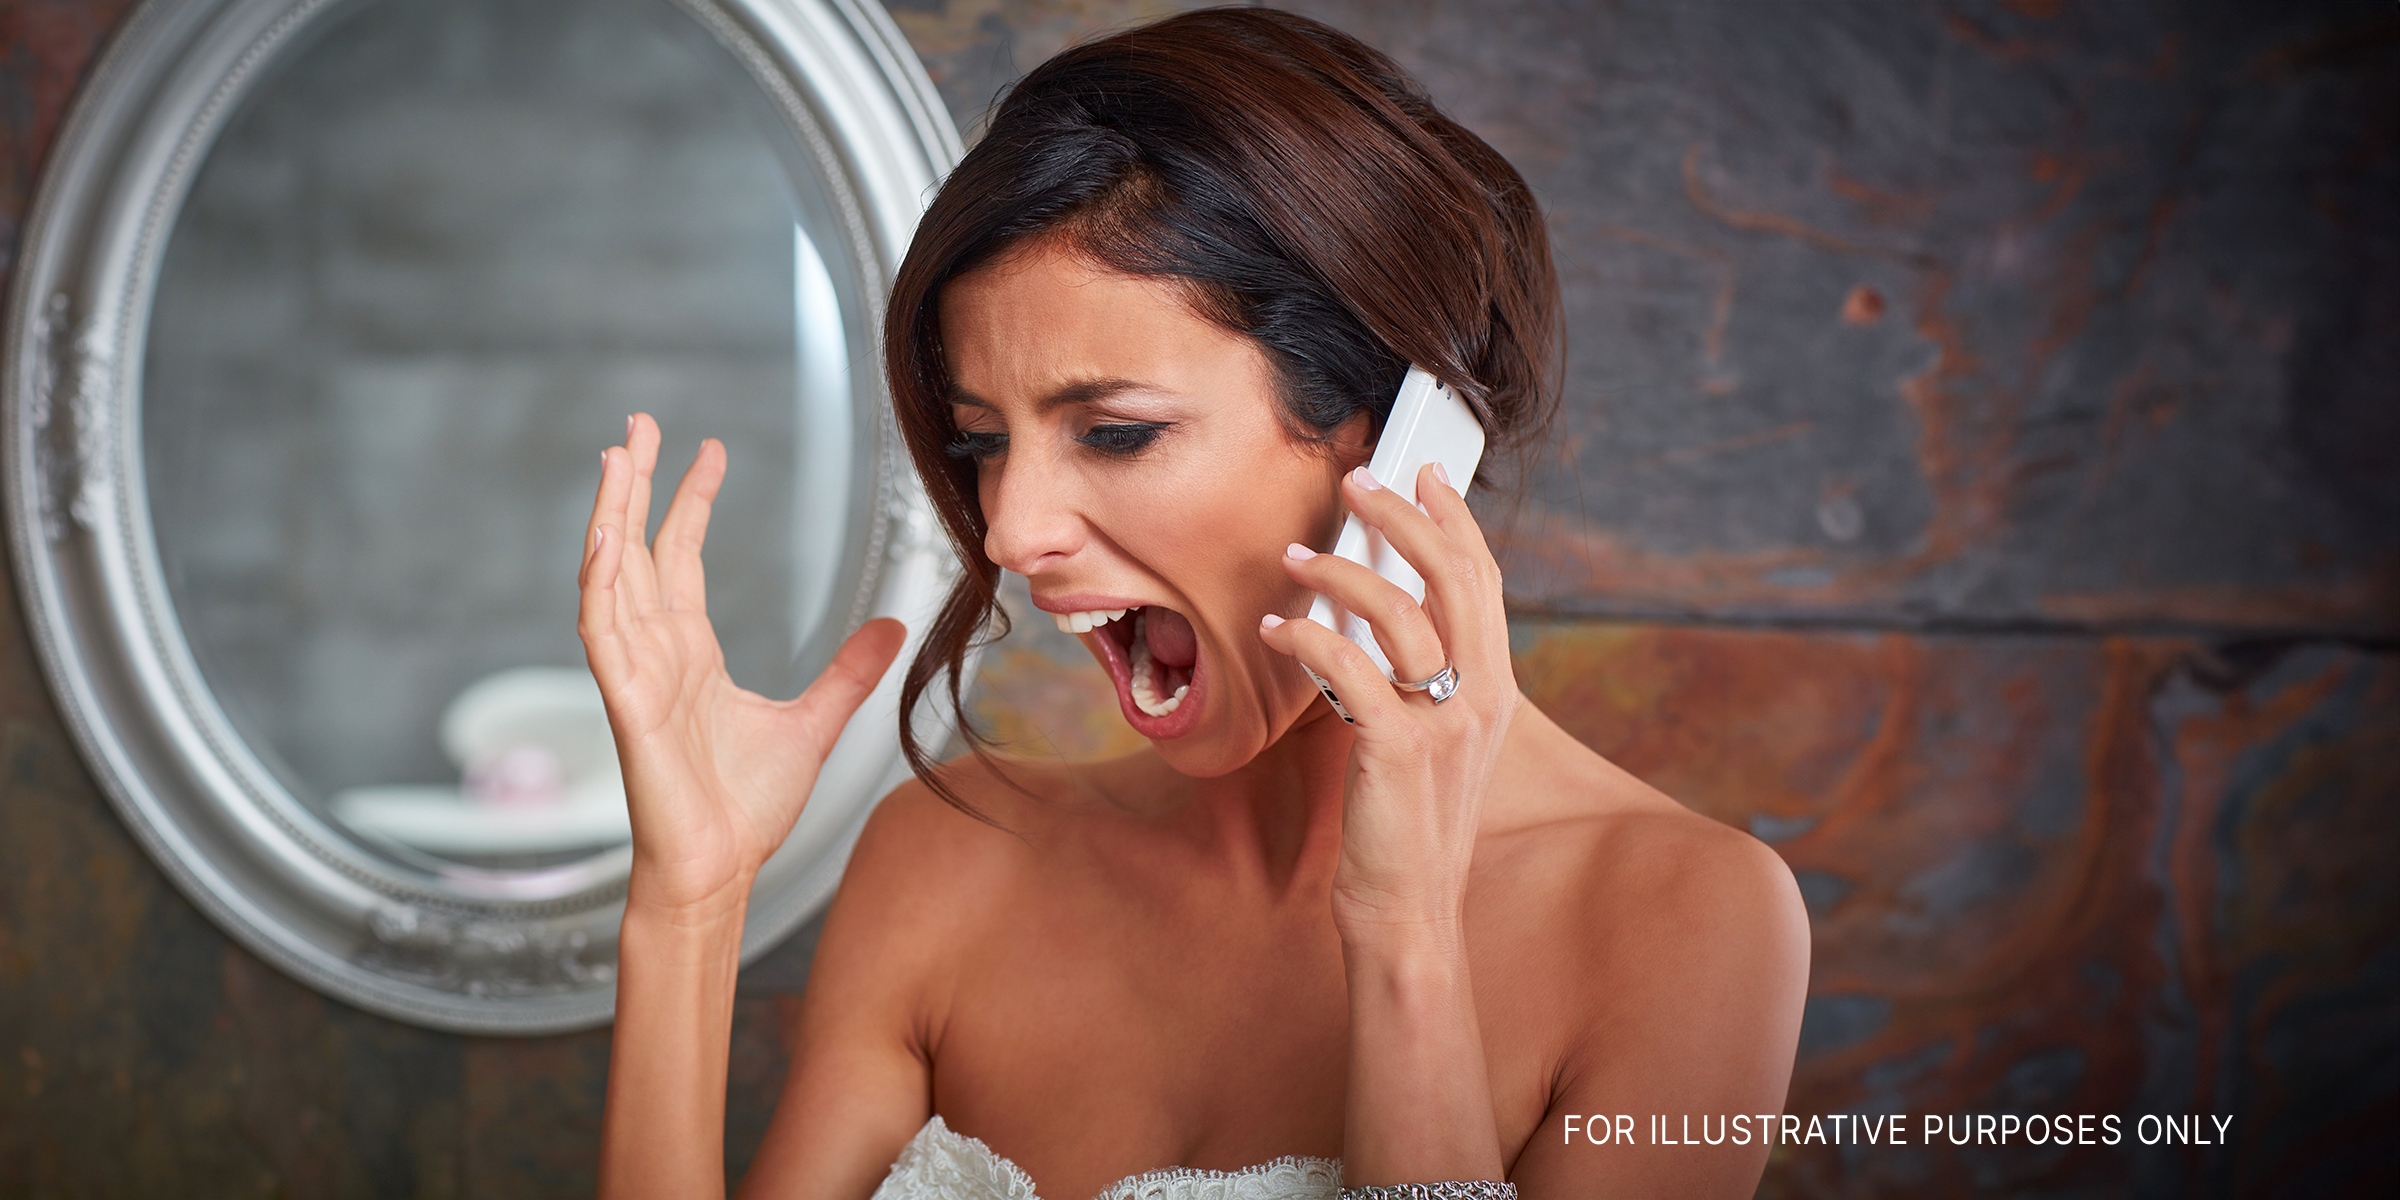 An angry bride yelling on the phone | Source: Shutterstock